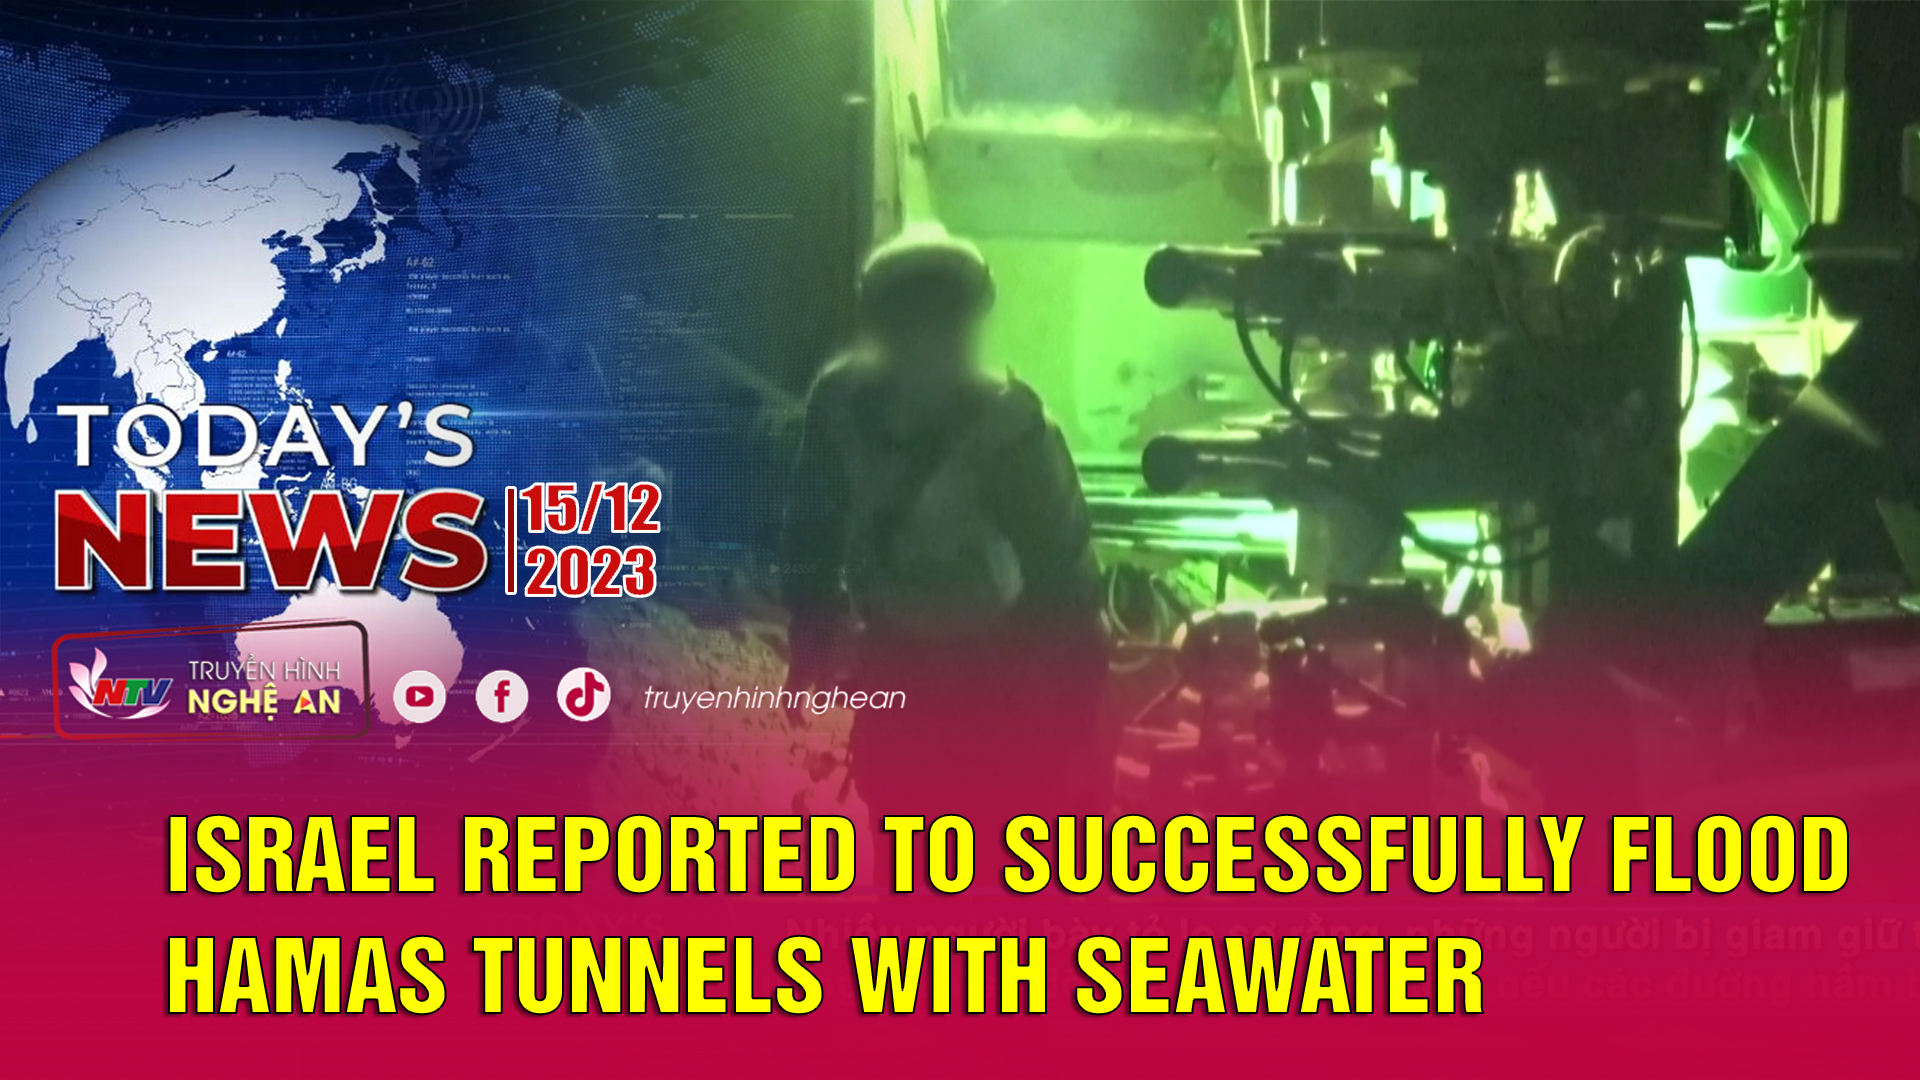 Today's News - 15/12/2023:Today's News - 15/12/2023: Israel reported to successfully flood Hamas tunnels with seawater